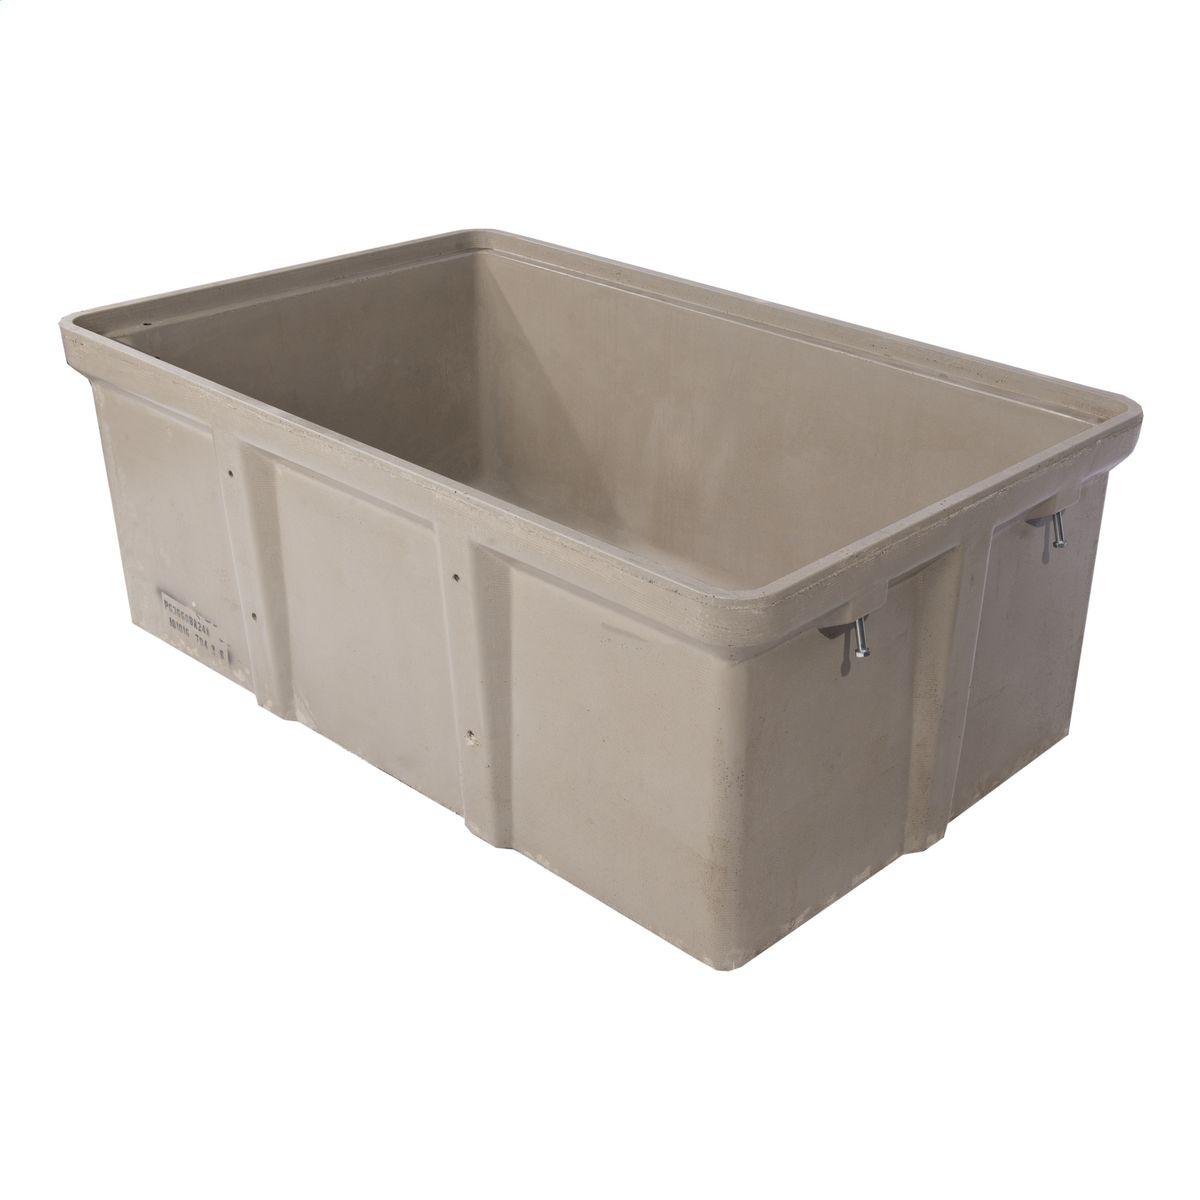 Hubbell PG3660BA31 Box, Polymer Concrete, Tier 22, 36"x60"X31", Straight Wall, Open Bottom 